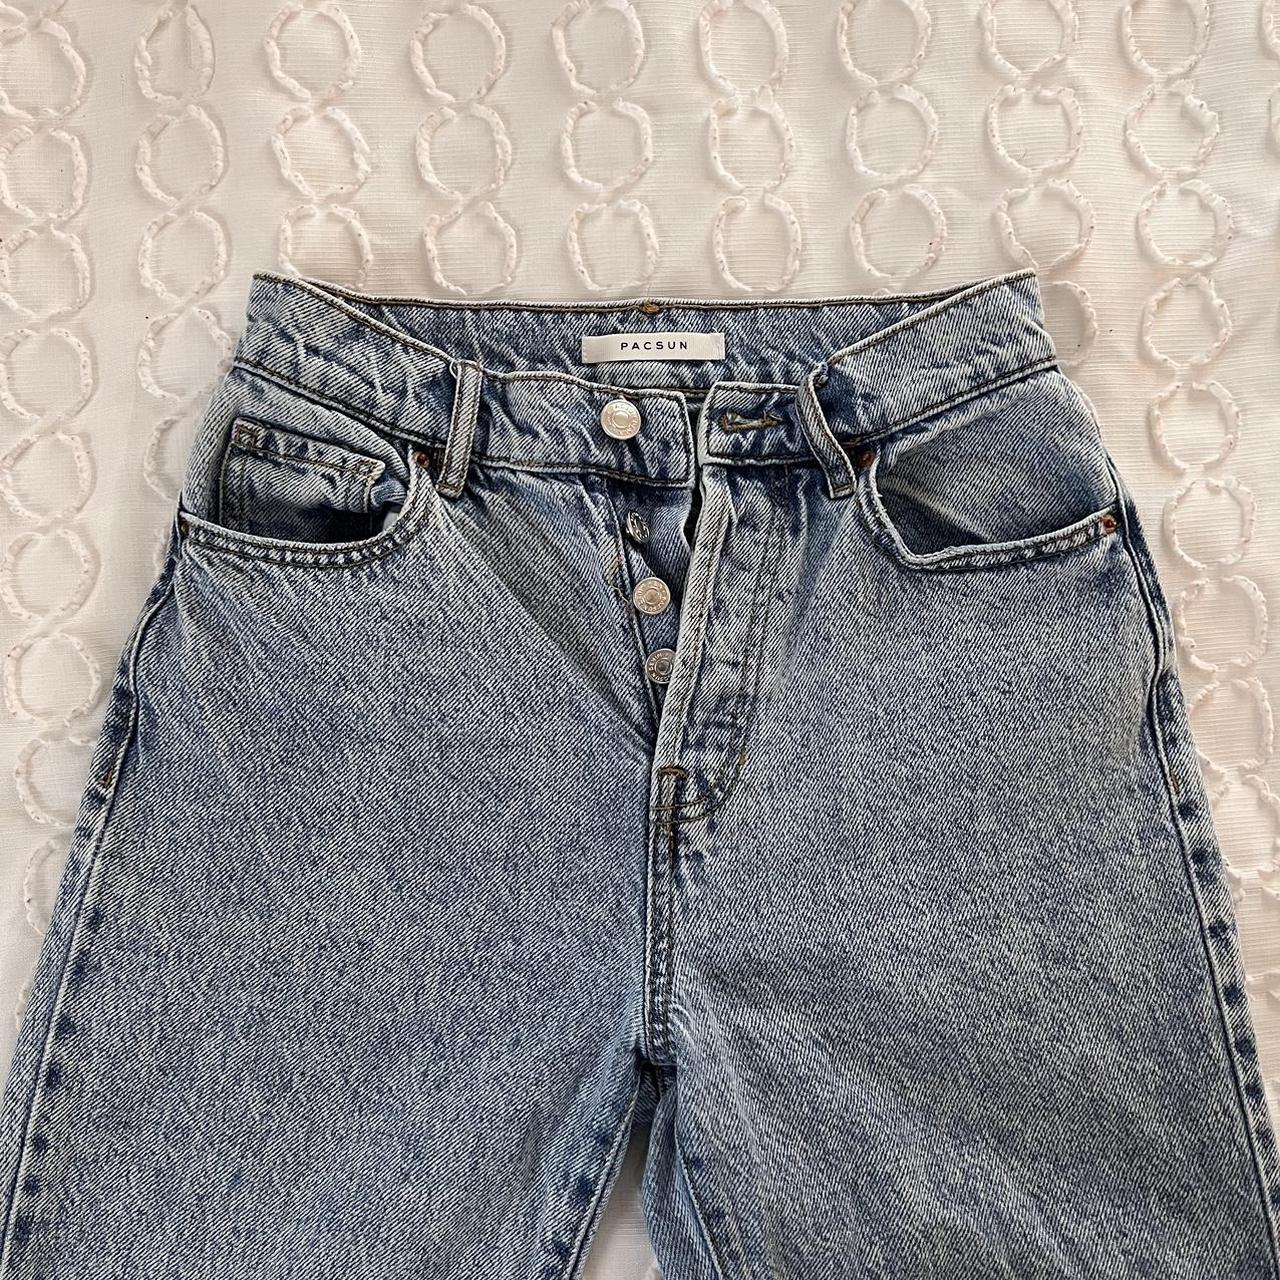 pacsun straight leg jeans so cute but too small on... - Depop